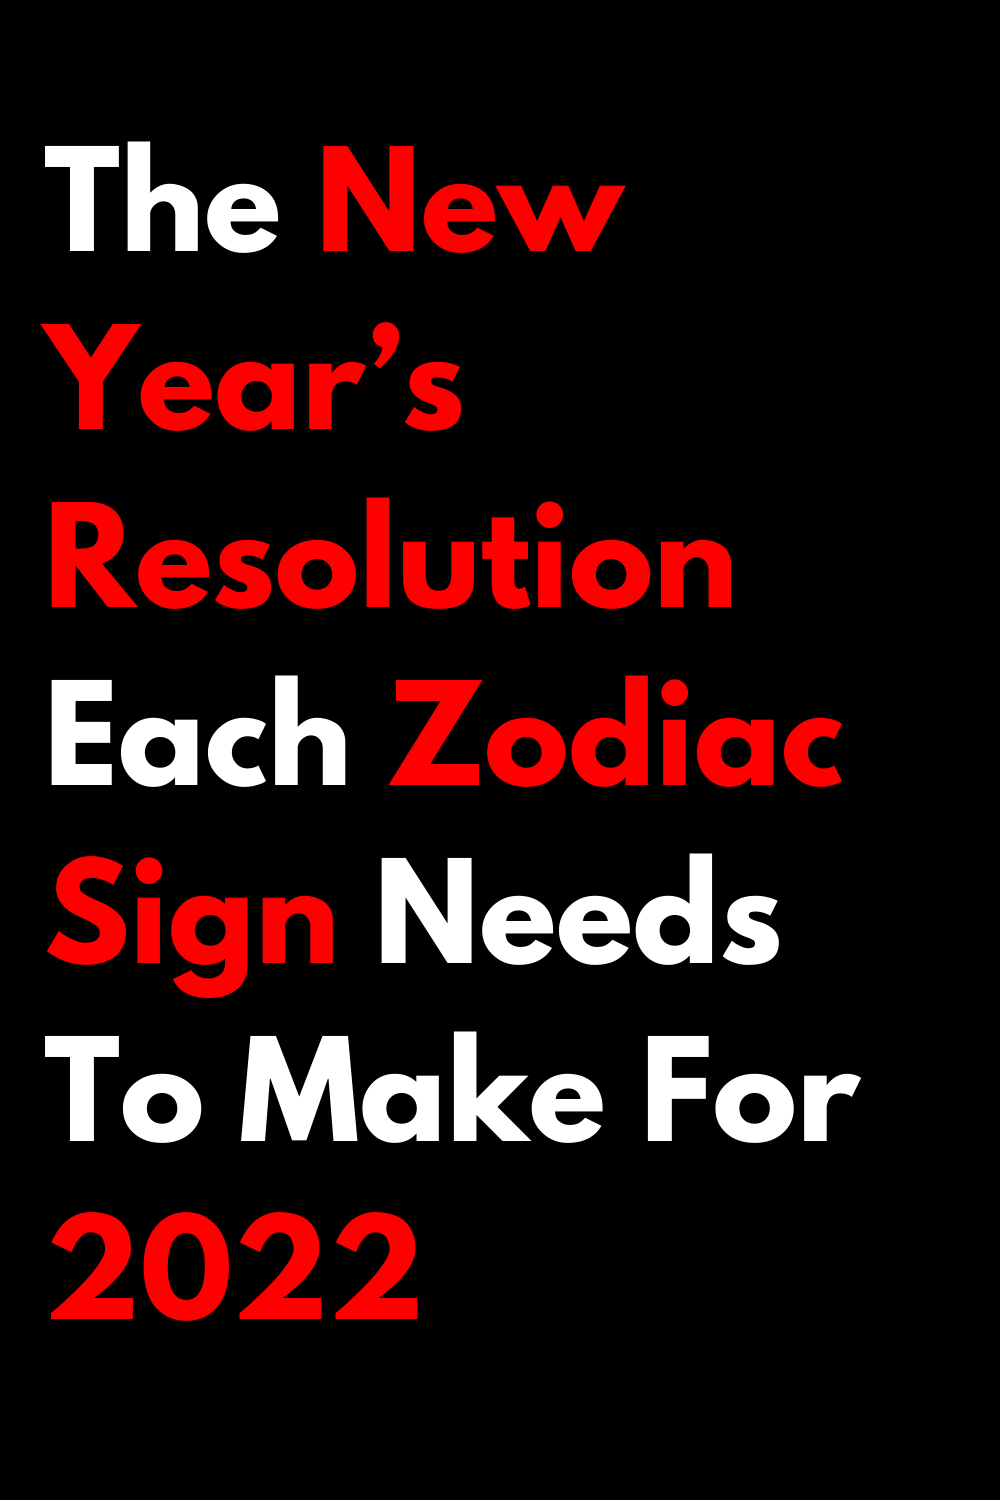 The New Year’s Resolution Each Zodiac Sign Needs To Make For 2022